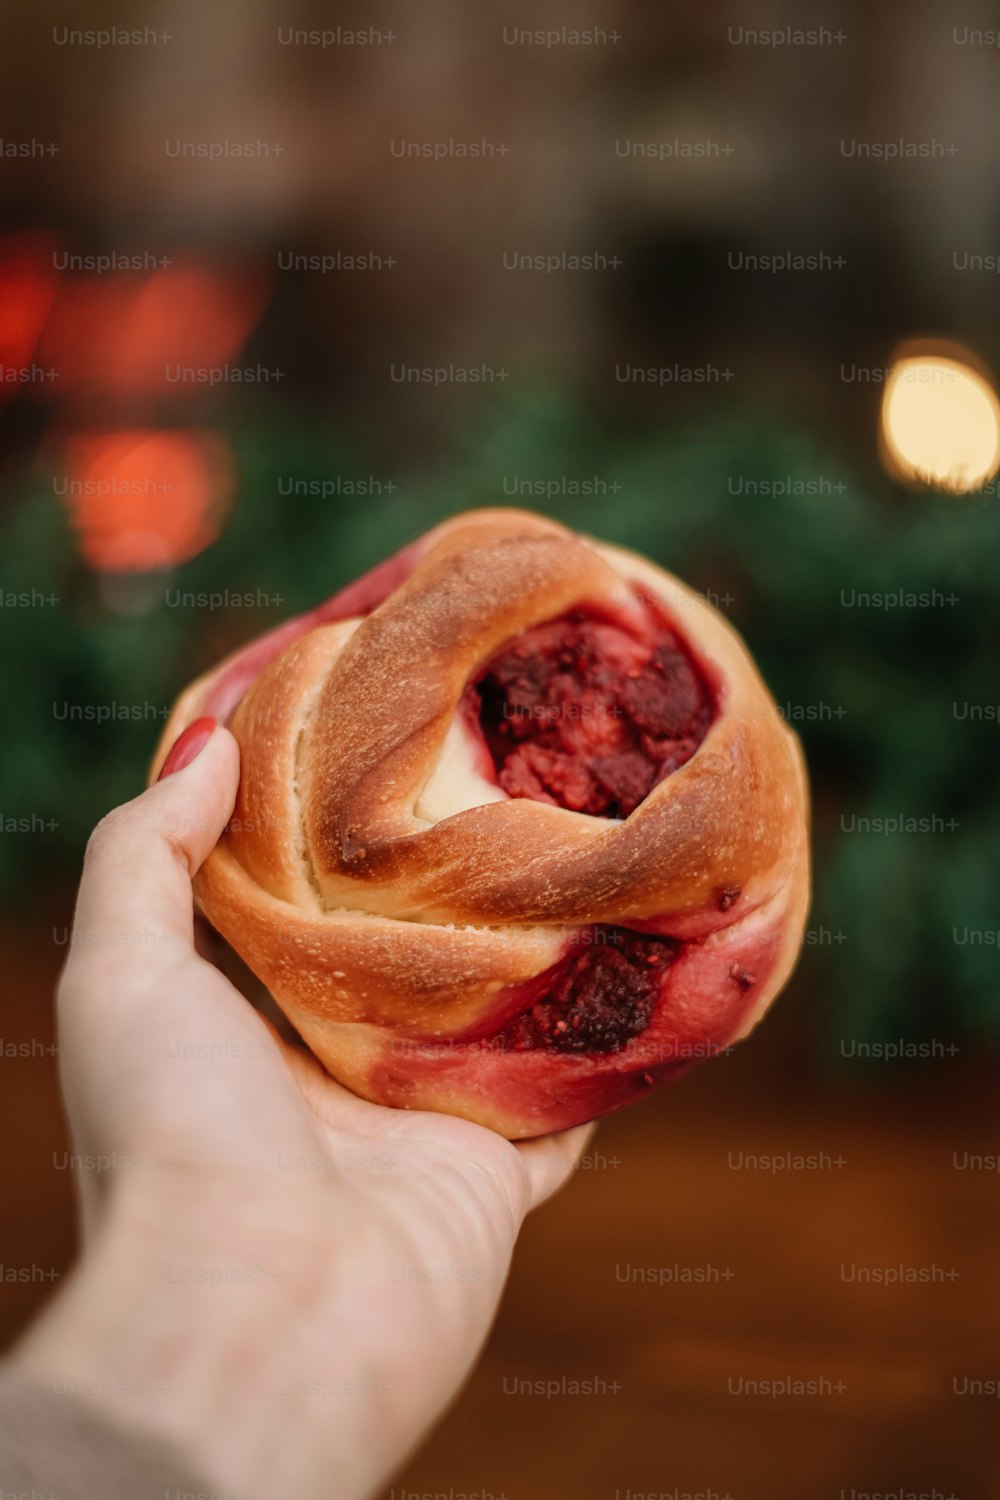 a person holding a pastry with a bite taken out of it